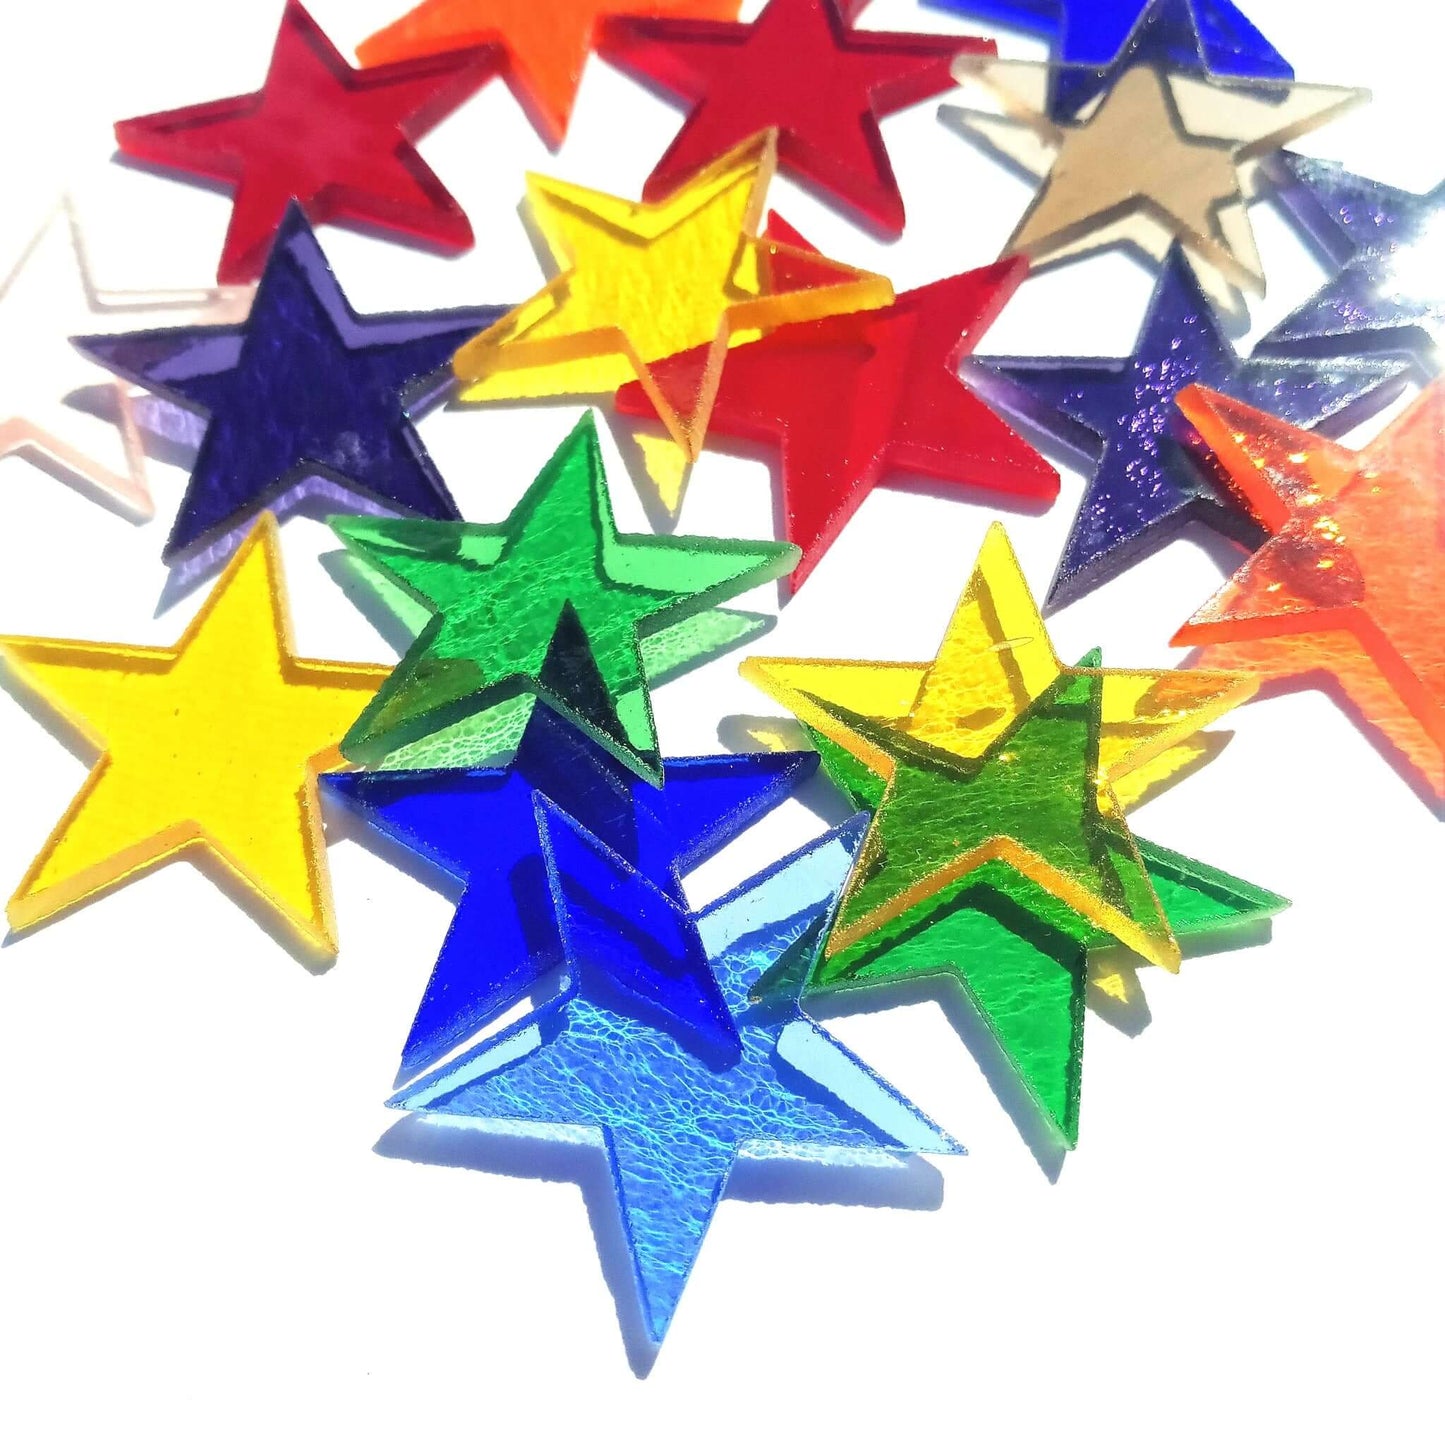 Precut Stained Glass 1.5" Stars, Assorted Colors, Package of 20